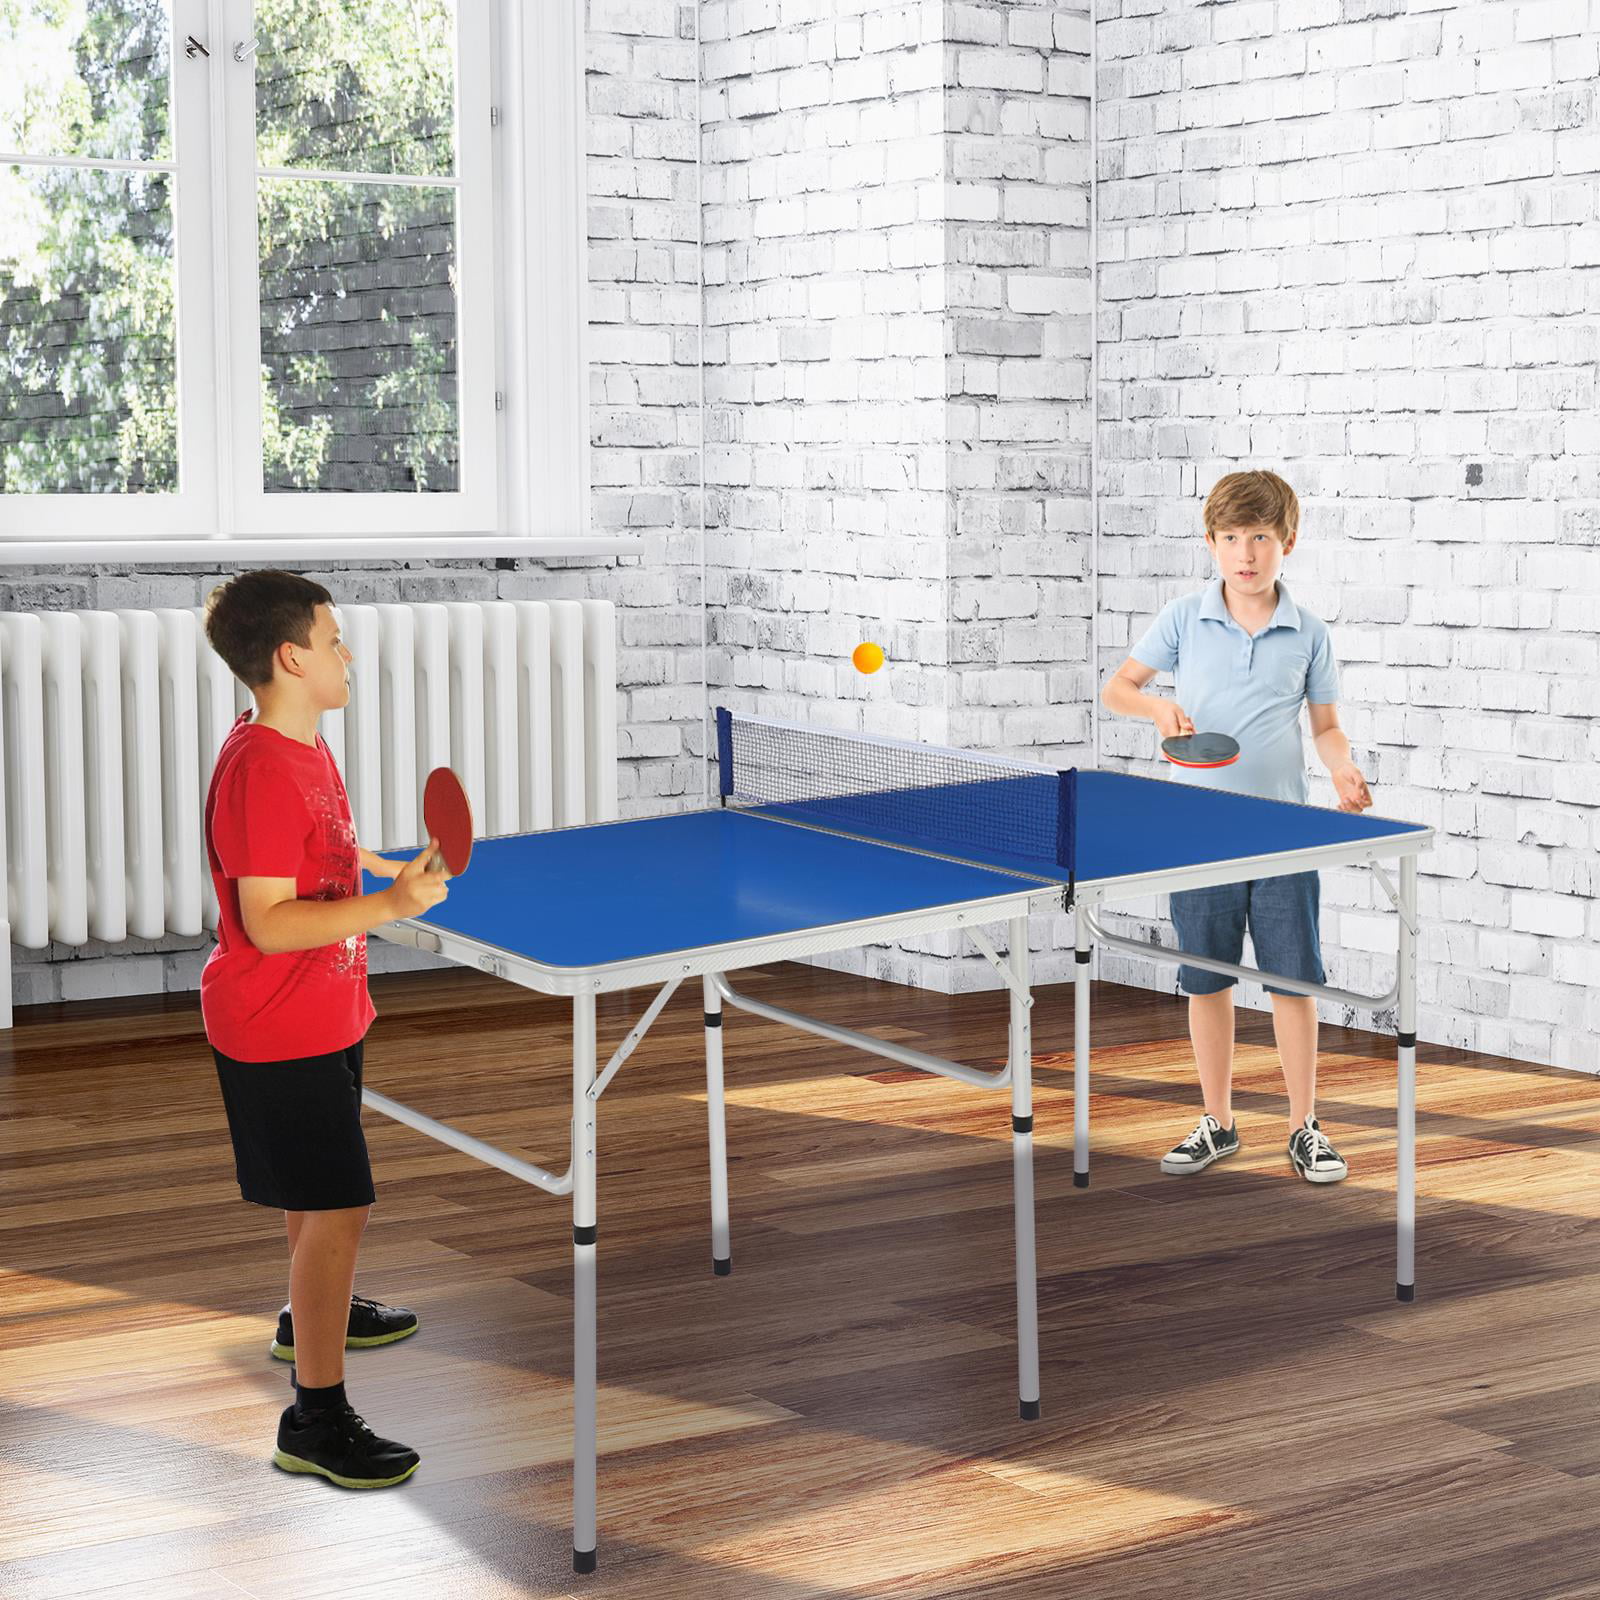 All-in-one Ping Pong Set Table Tennis Net 2 paddle 3 balls for Indoor Games 